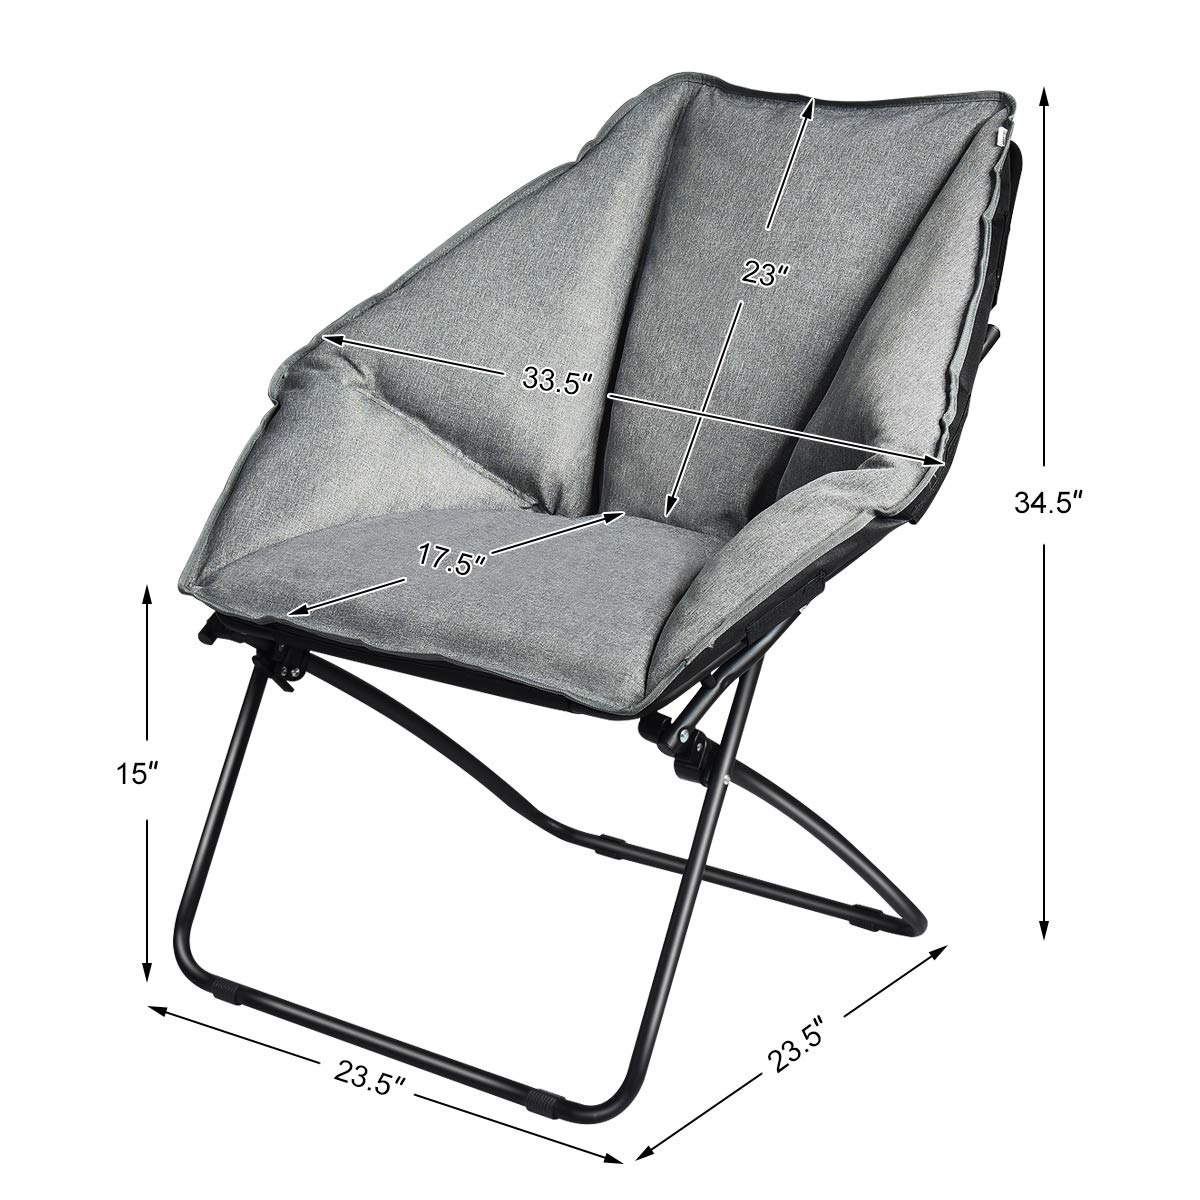 Giantex Portable Camping Chair, Moon Saucer Chair, Outdoor Folding Chair  with Soft Padded Seat, Lawn Chair with Cup Holder and Carry Bag (Grey)